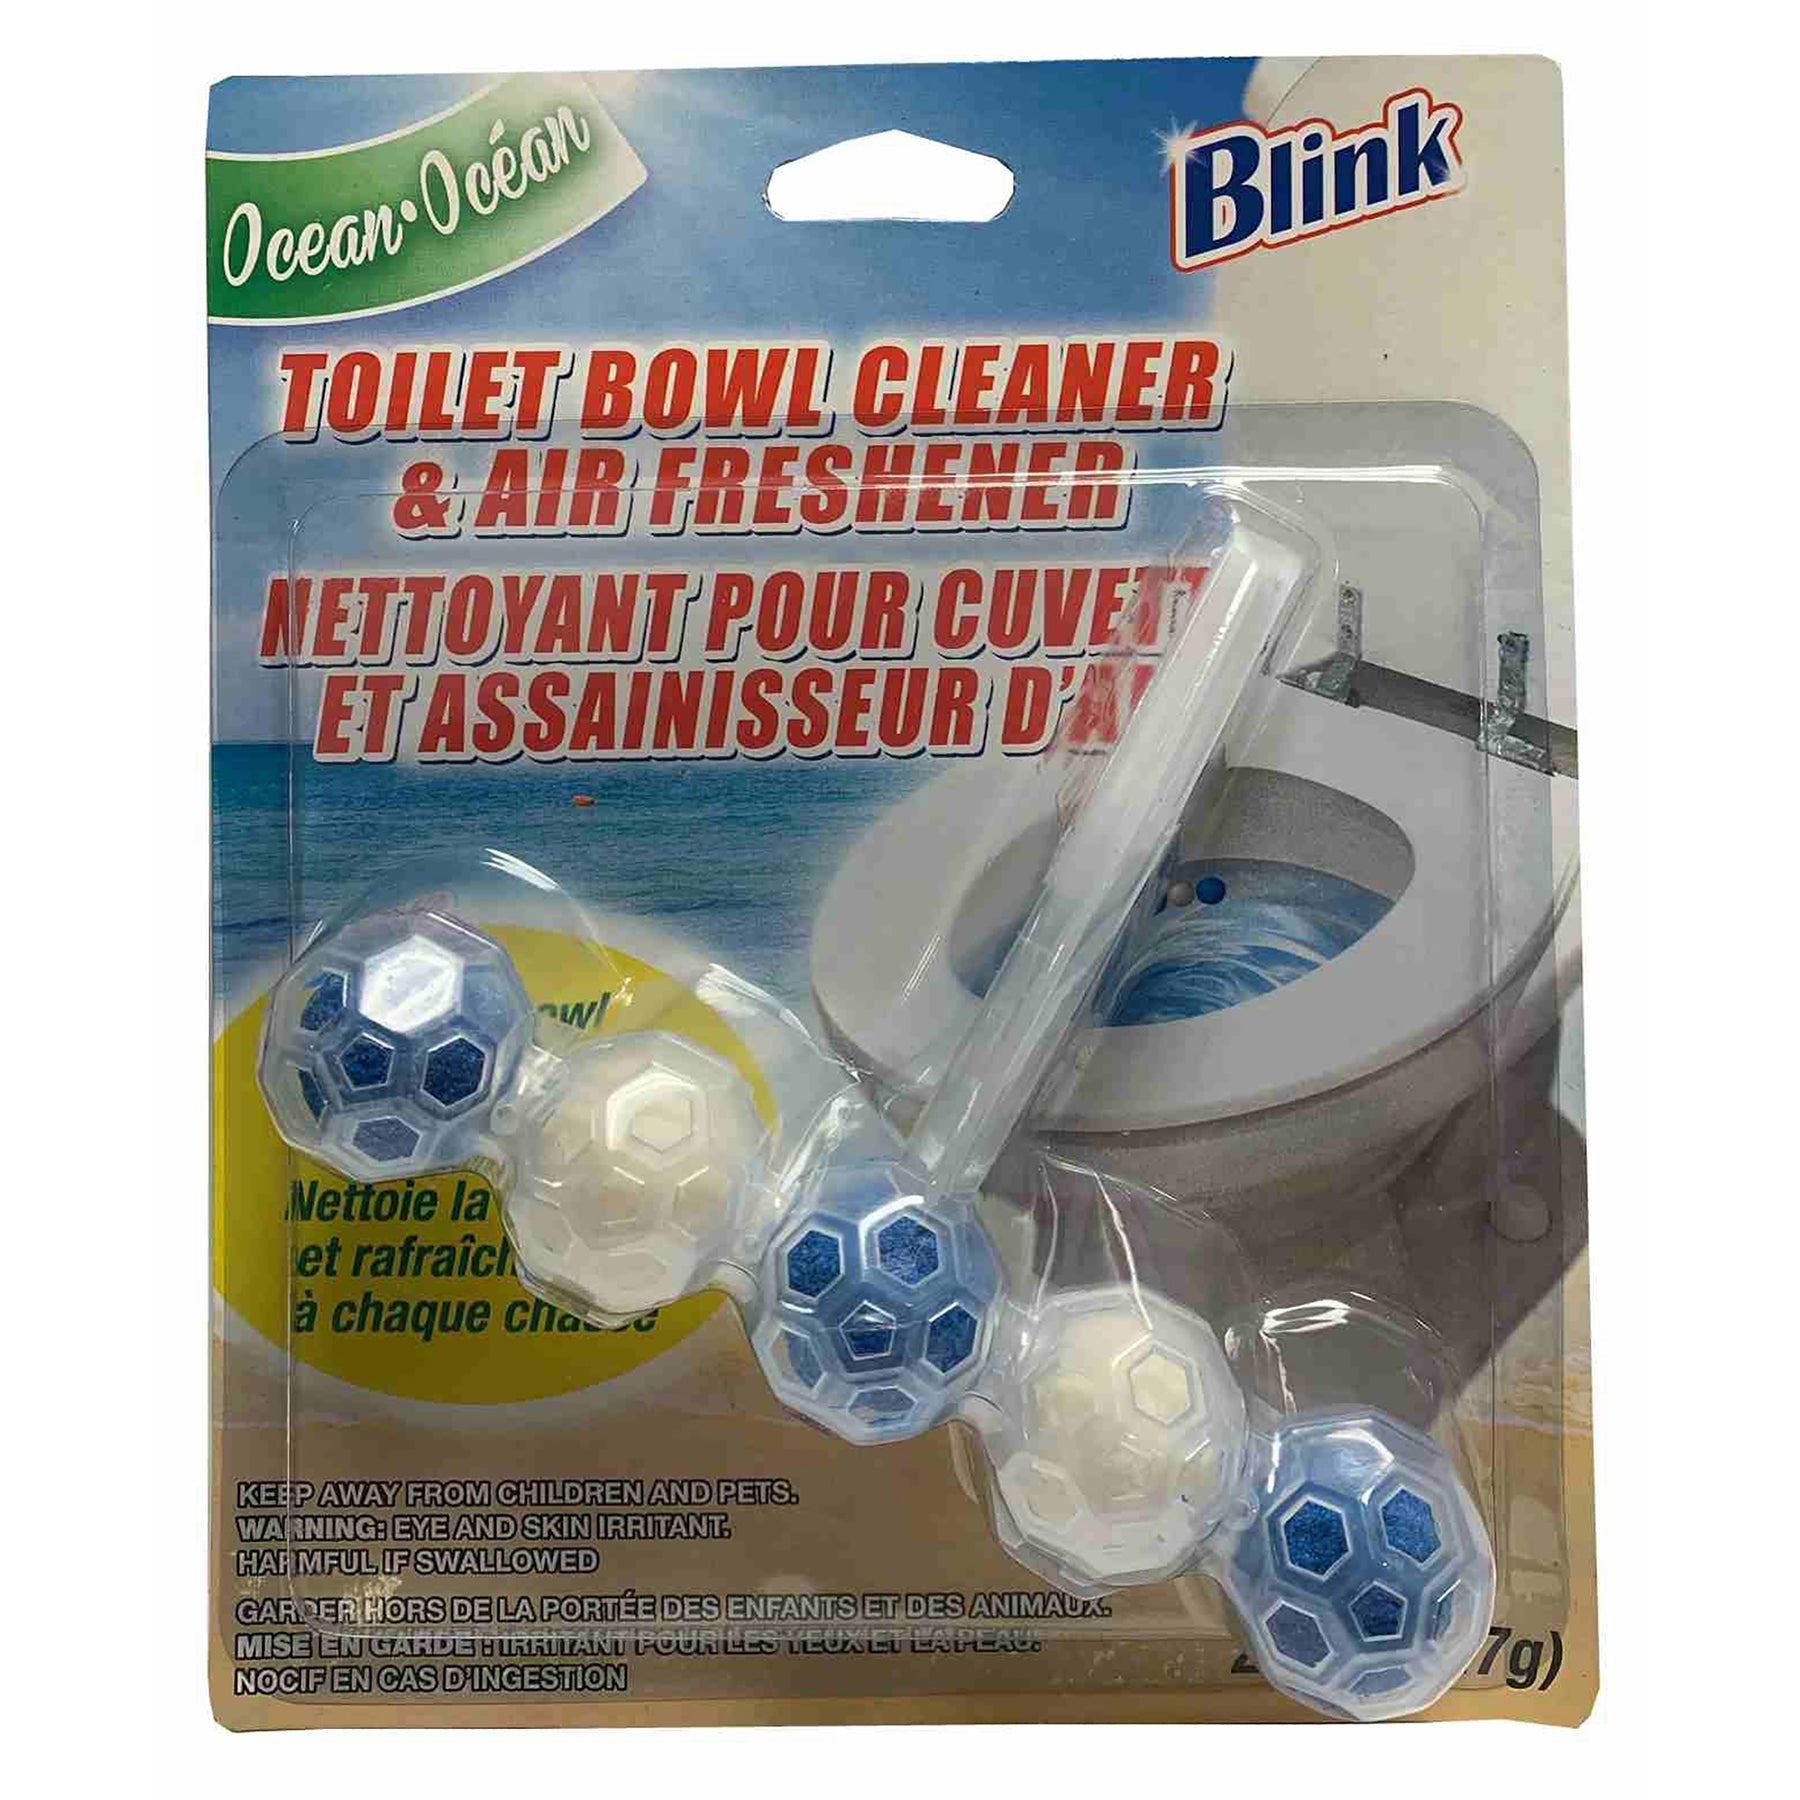 Blink Toilet Bowl Cleaner and Air Freshener 4x5in 2oz